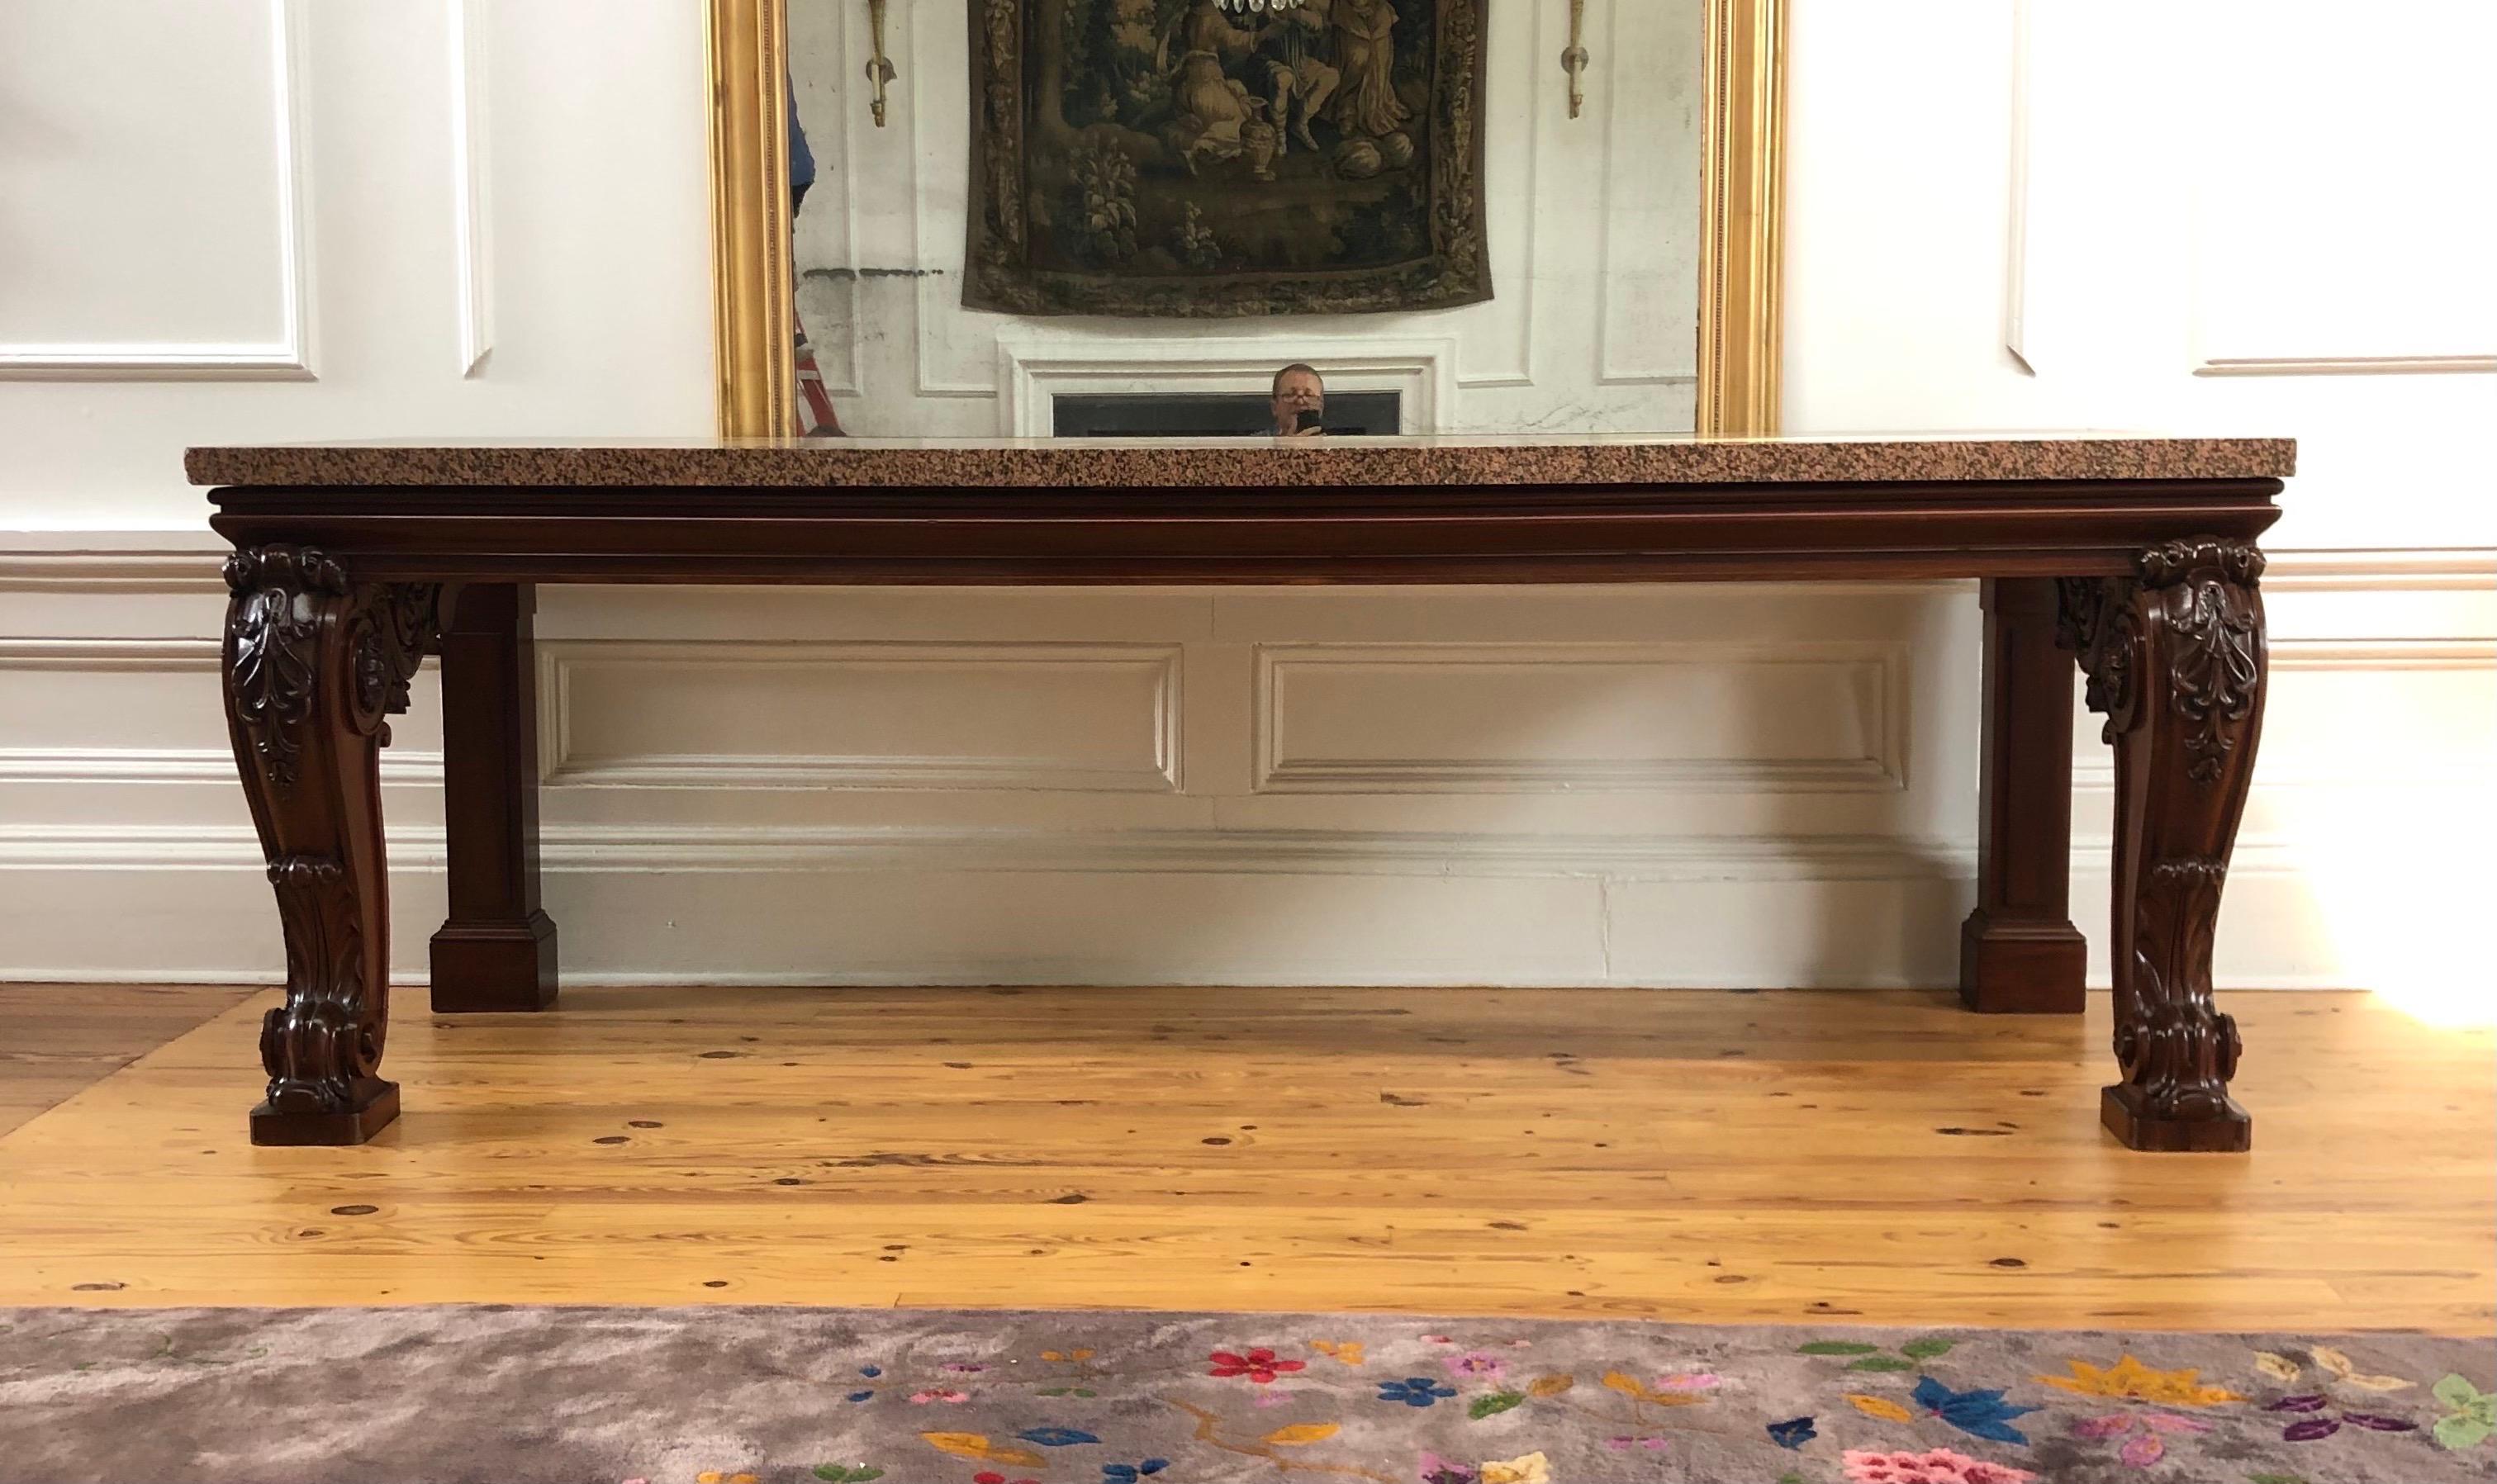 This Important Monumental Regal Irish Georgian carved mahogany granite slab console / hall table was made in the early 19th Century. A most impressive Classical Form Freestanding Slab Table raised by Four solid mahogany legs supporting the original